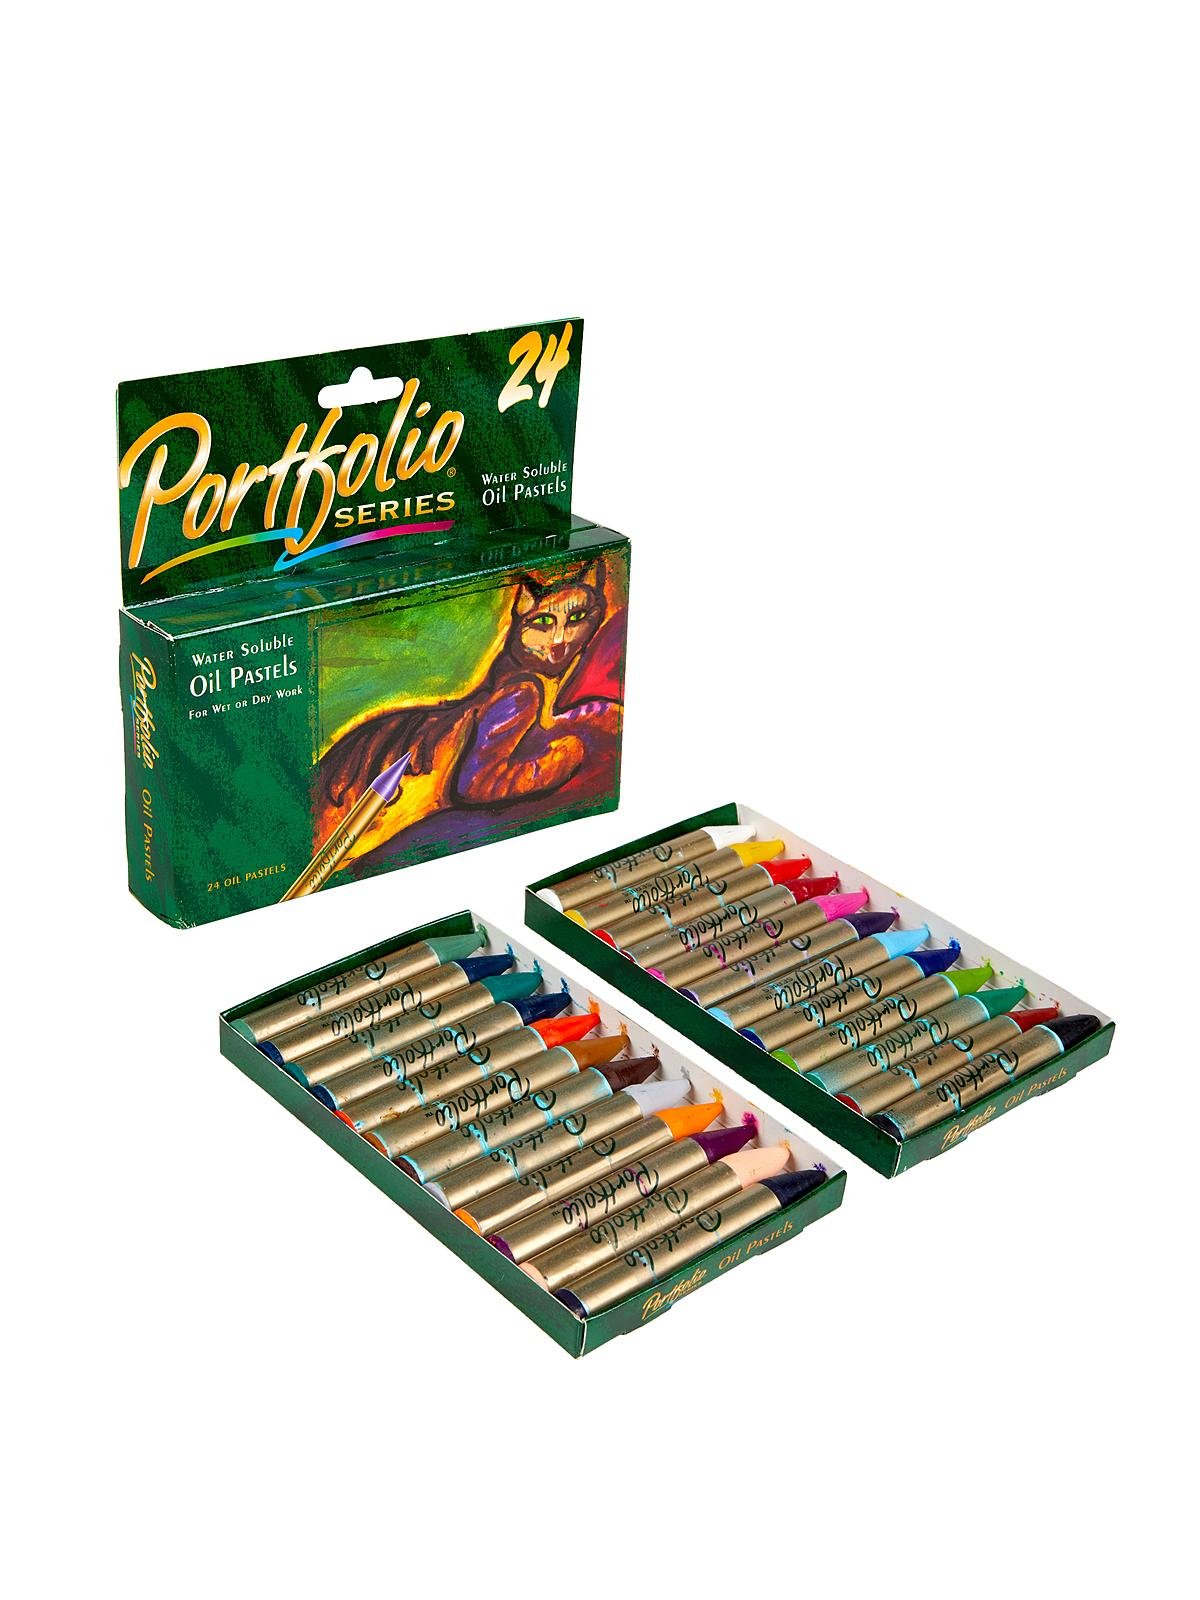 Have your tried Water-soluble oil pastels from Art Philosophy yet